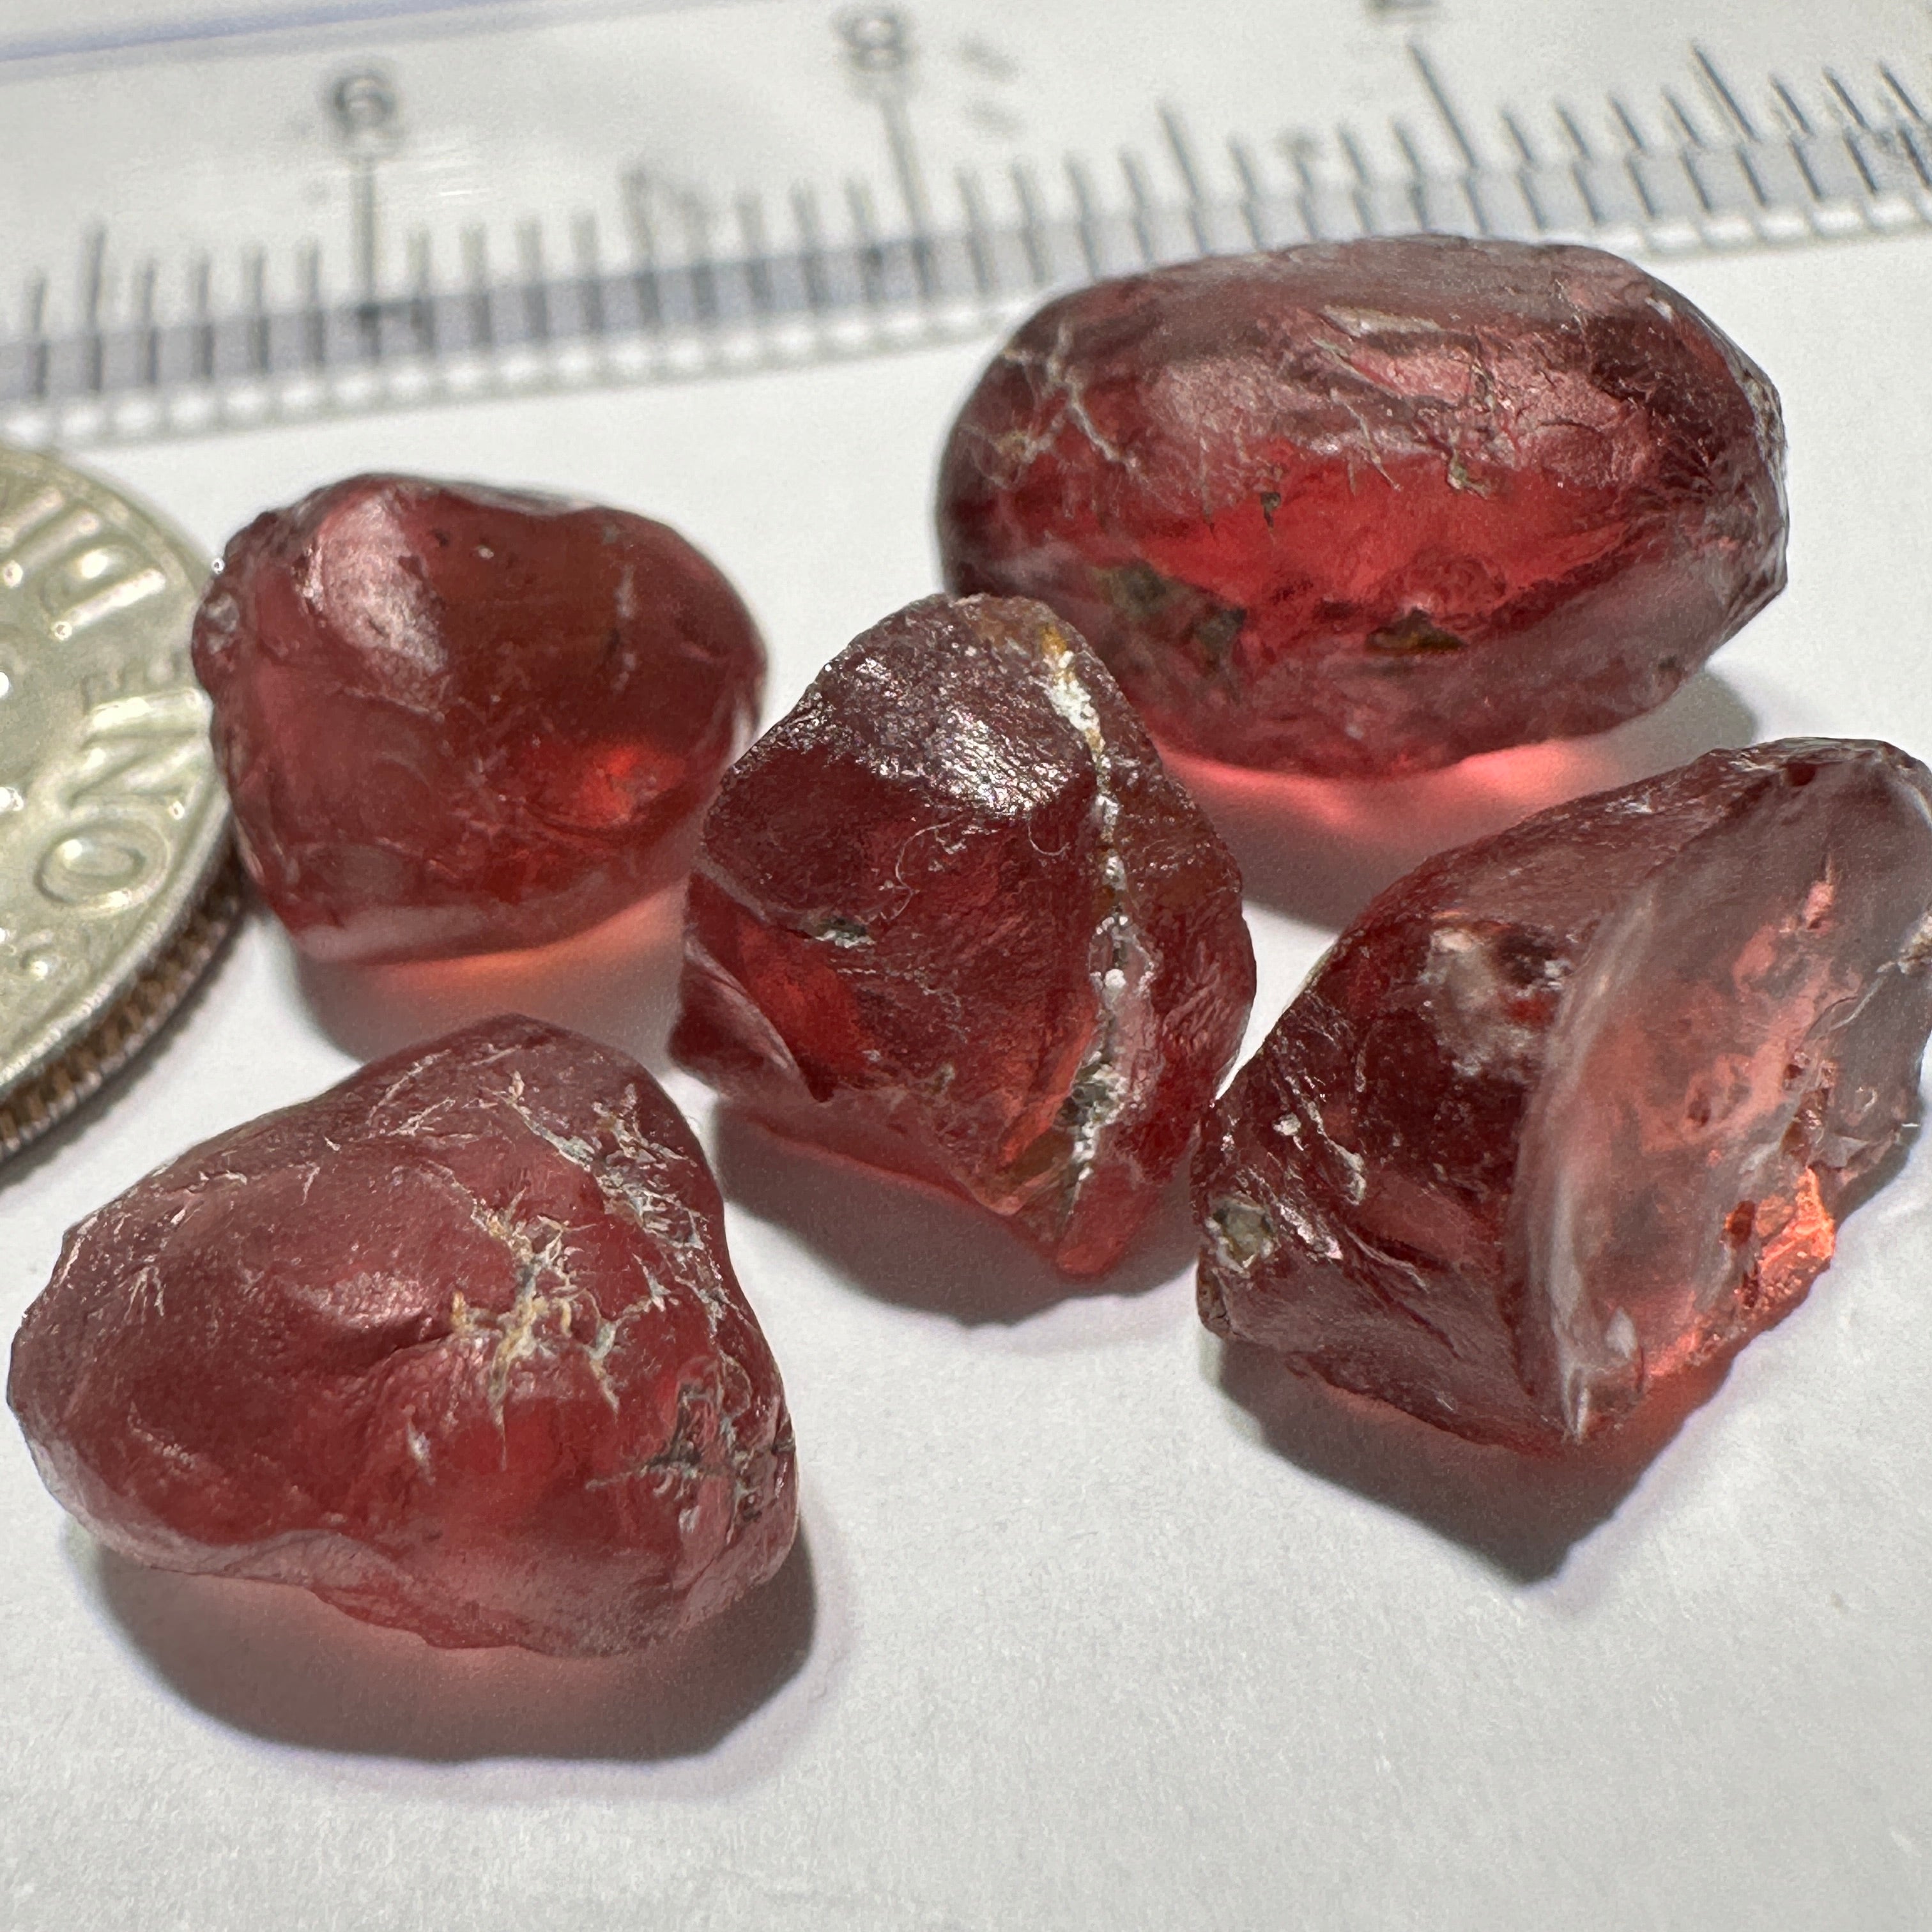 23.52ct Champagne Garnet Lot, Tanzania. 3.28ct-7.55ct. Included, Untreated Unheated